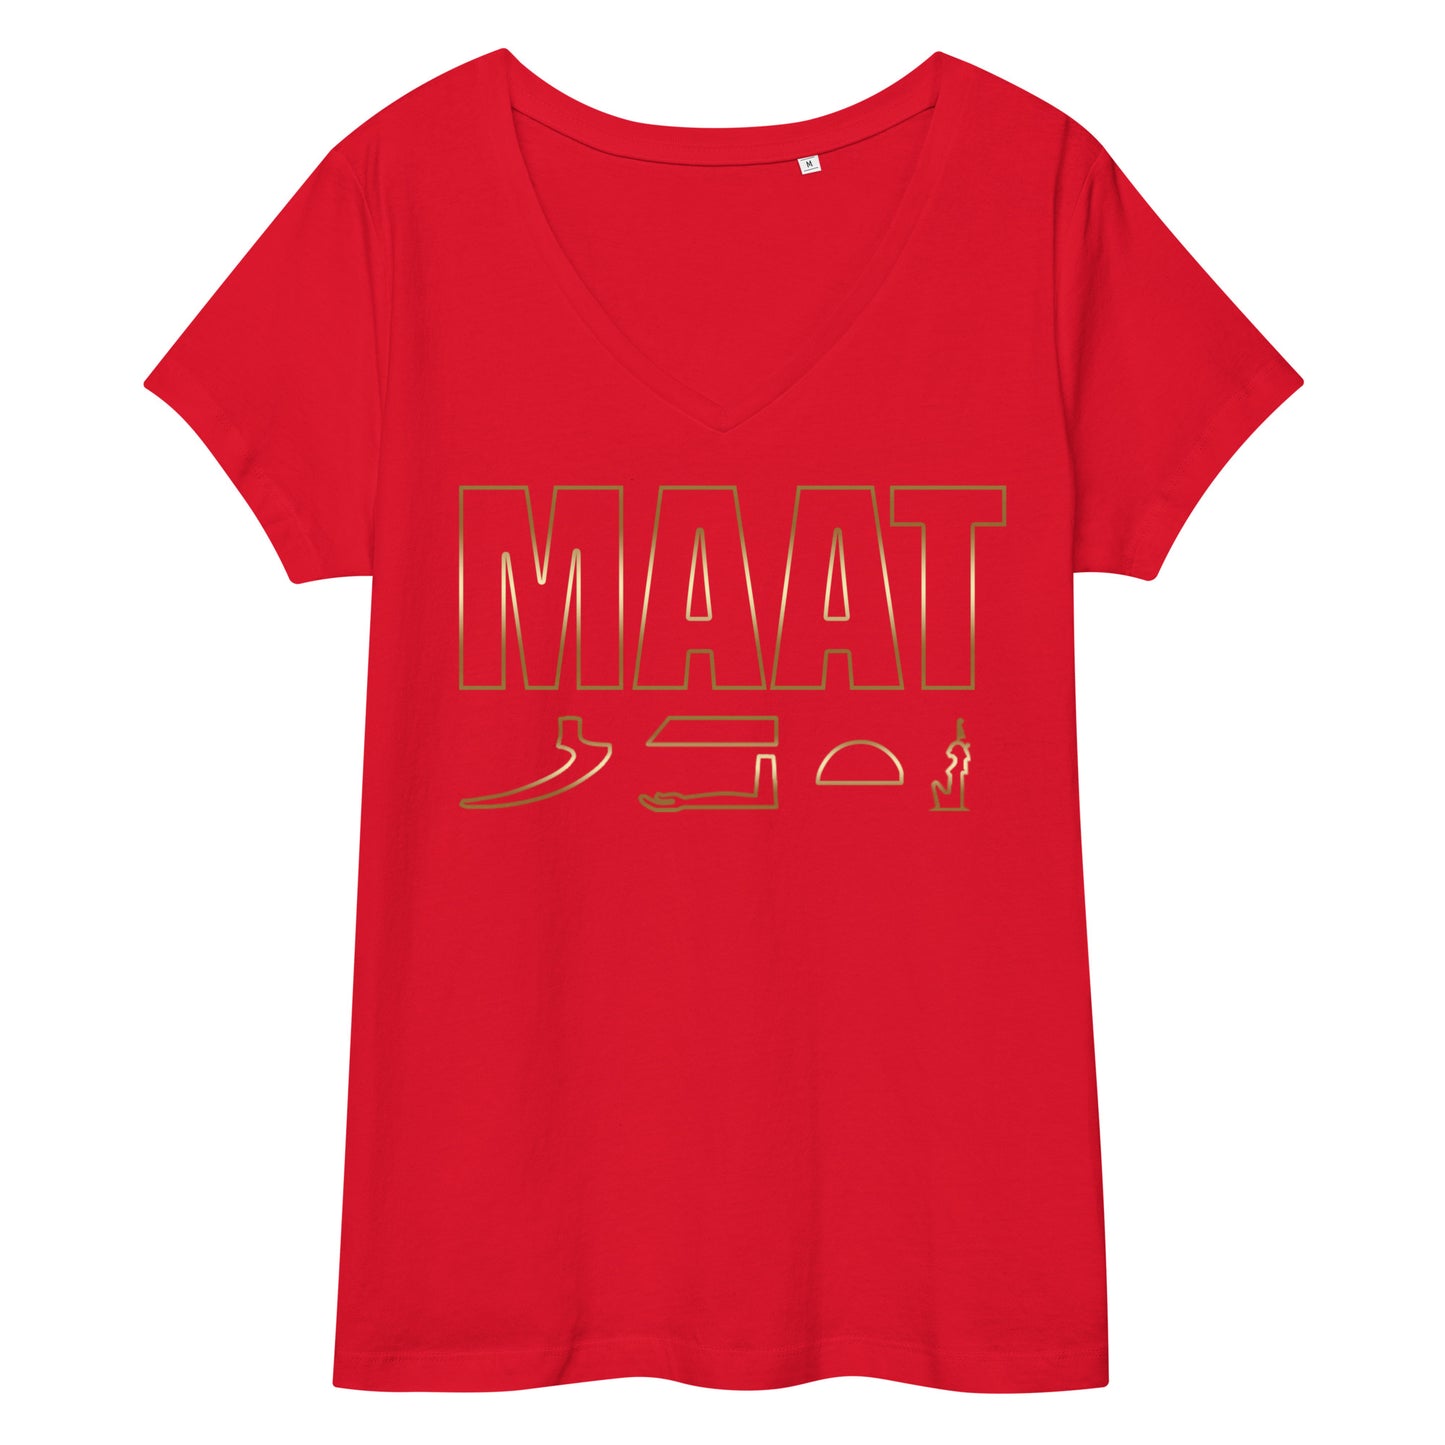 MAAT FOREVER Women’s fitted v-neck t-shirt MAAT